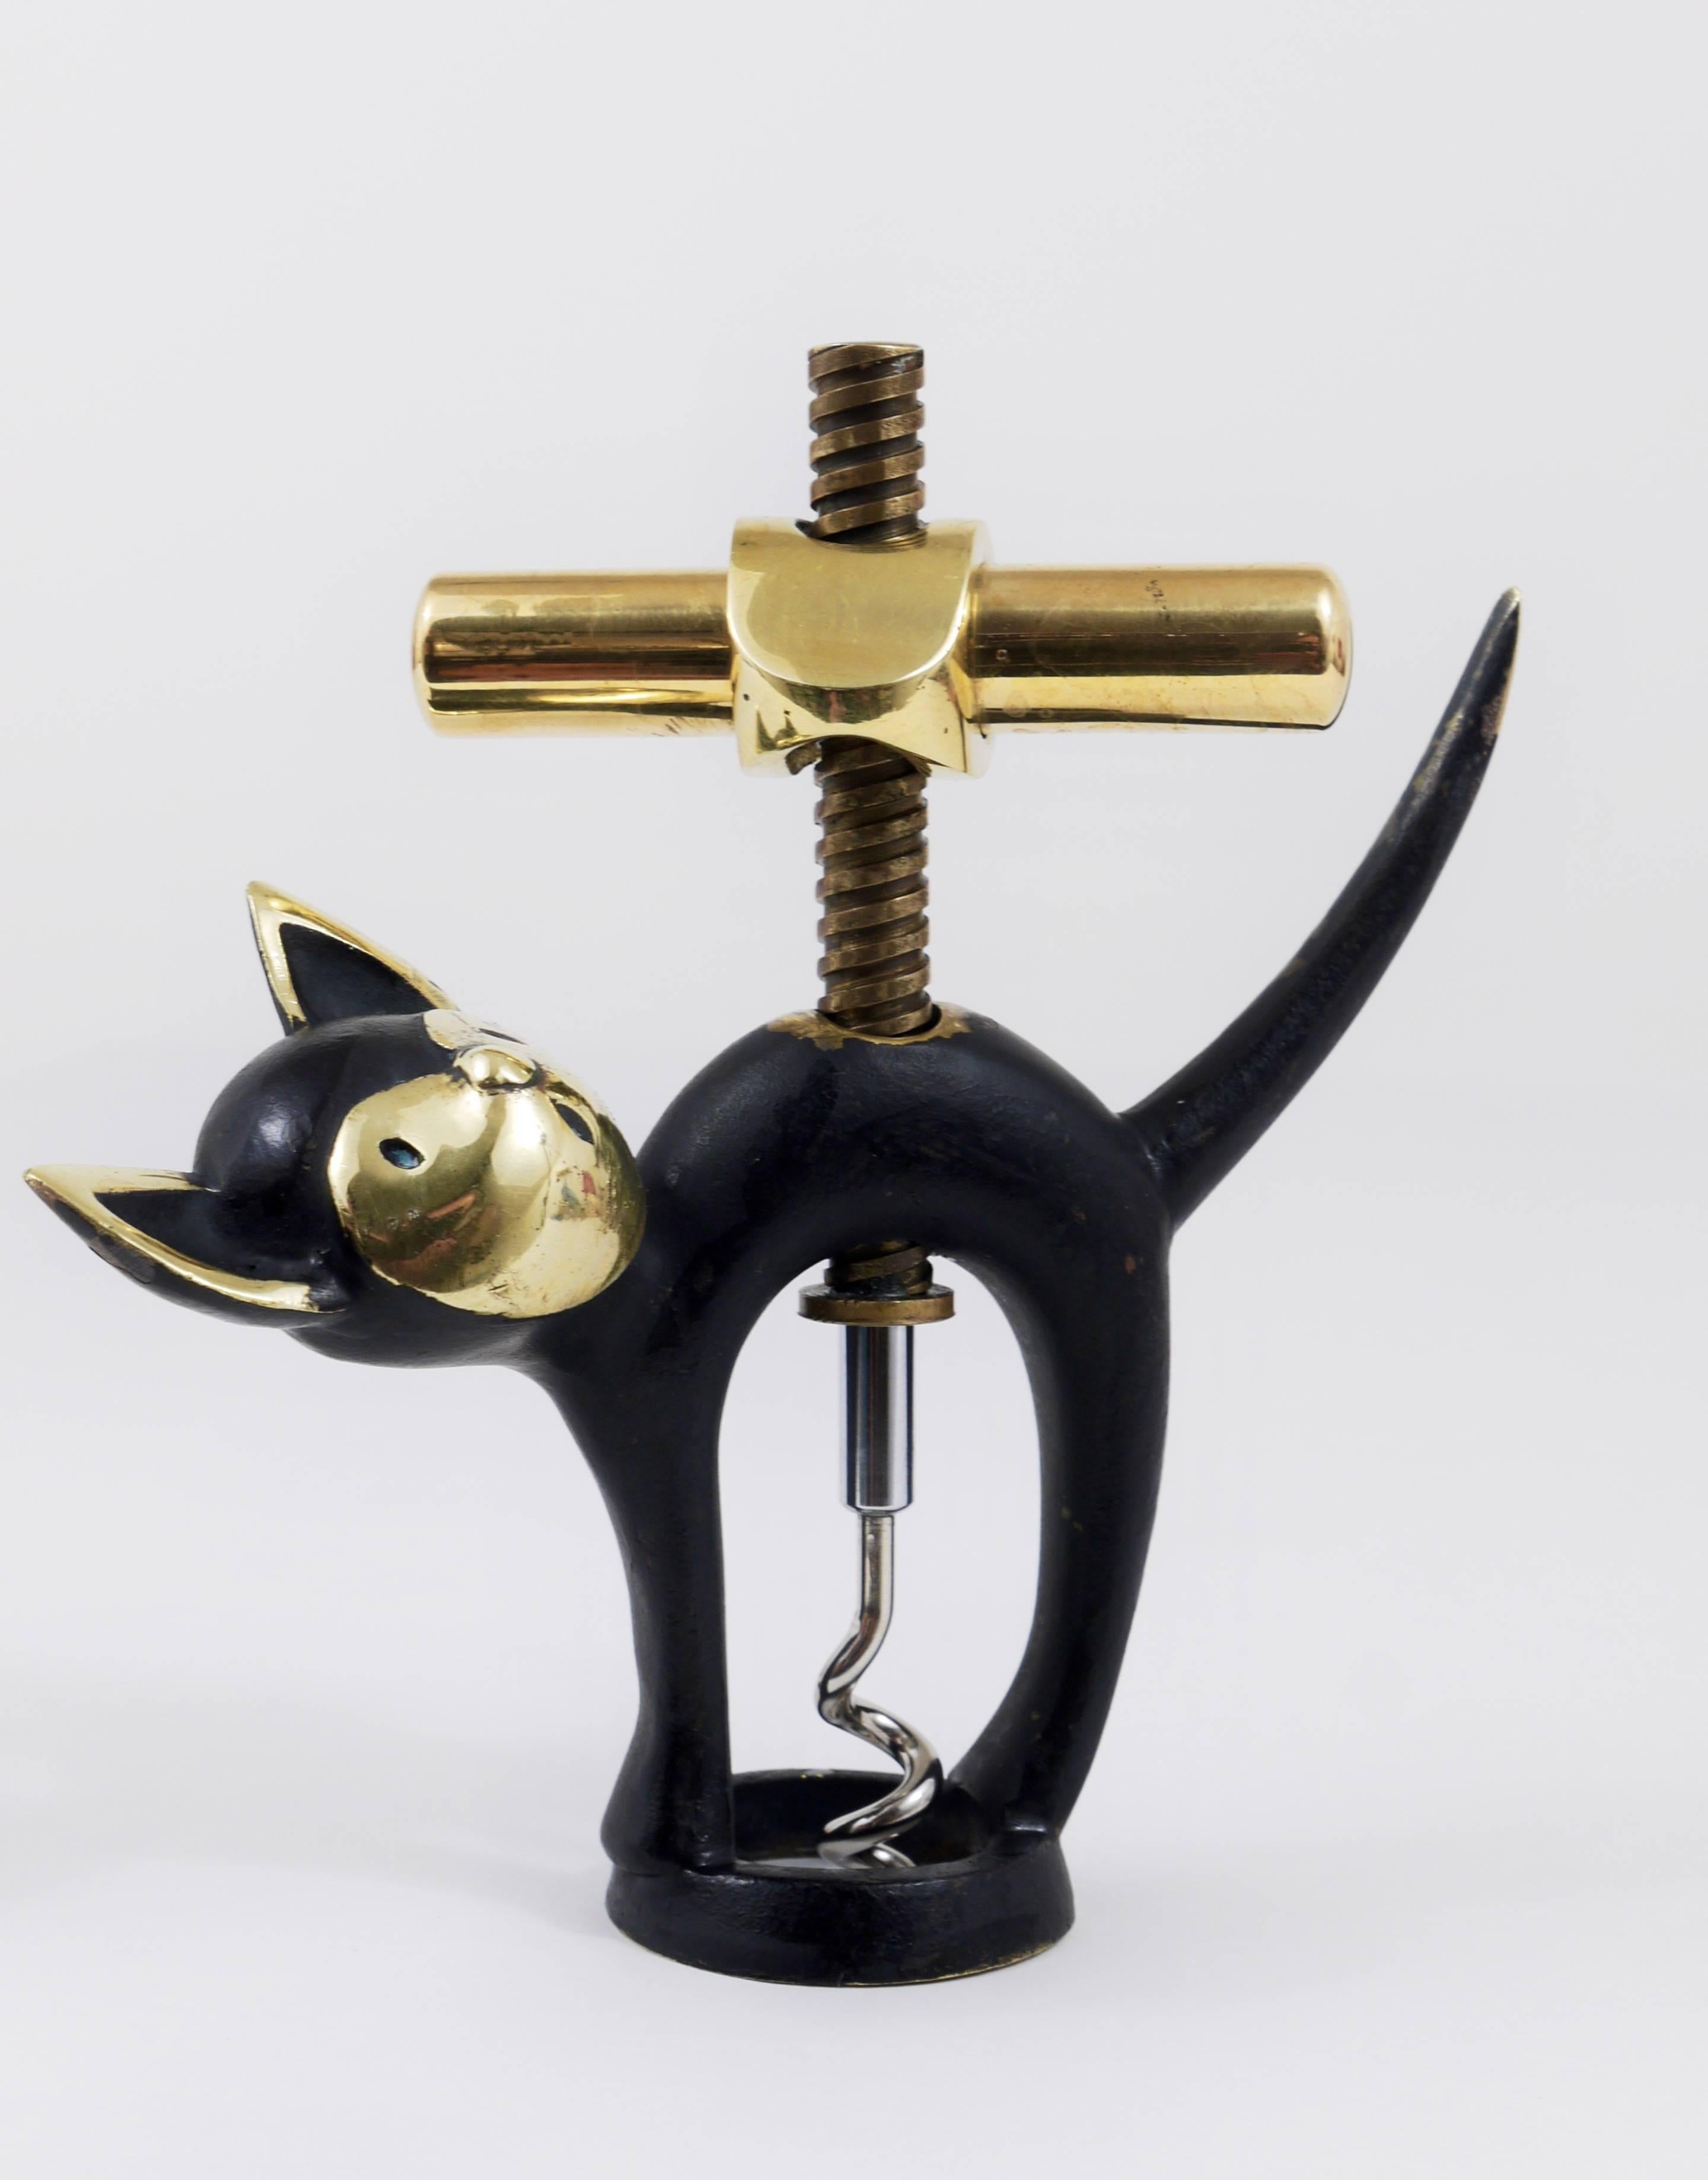 A charming Mid-Century bottle opener or cork screw, displaying a cat. A very humorous design by Walter Bosse, executed by Hertha Baller Austria in the 1950s. Made of brass, in good condition with charming patina on the brass.

We offer more Walter